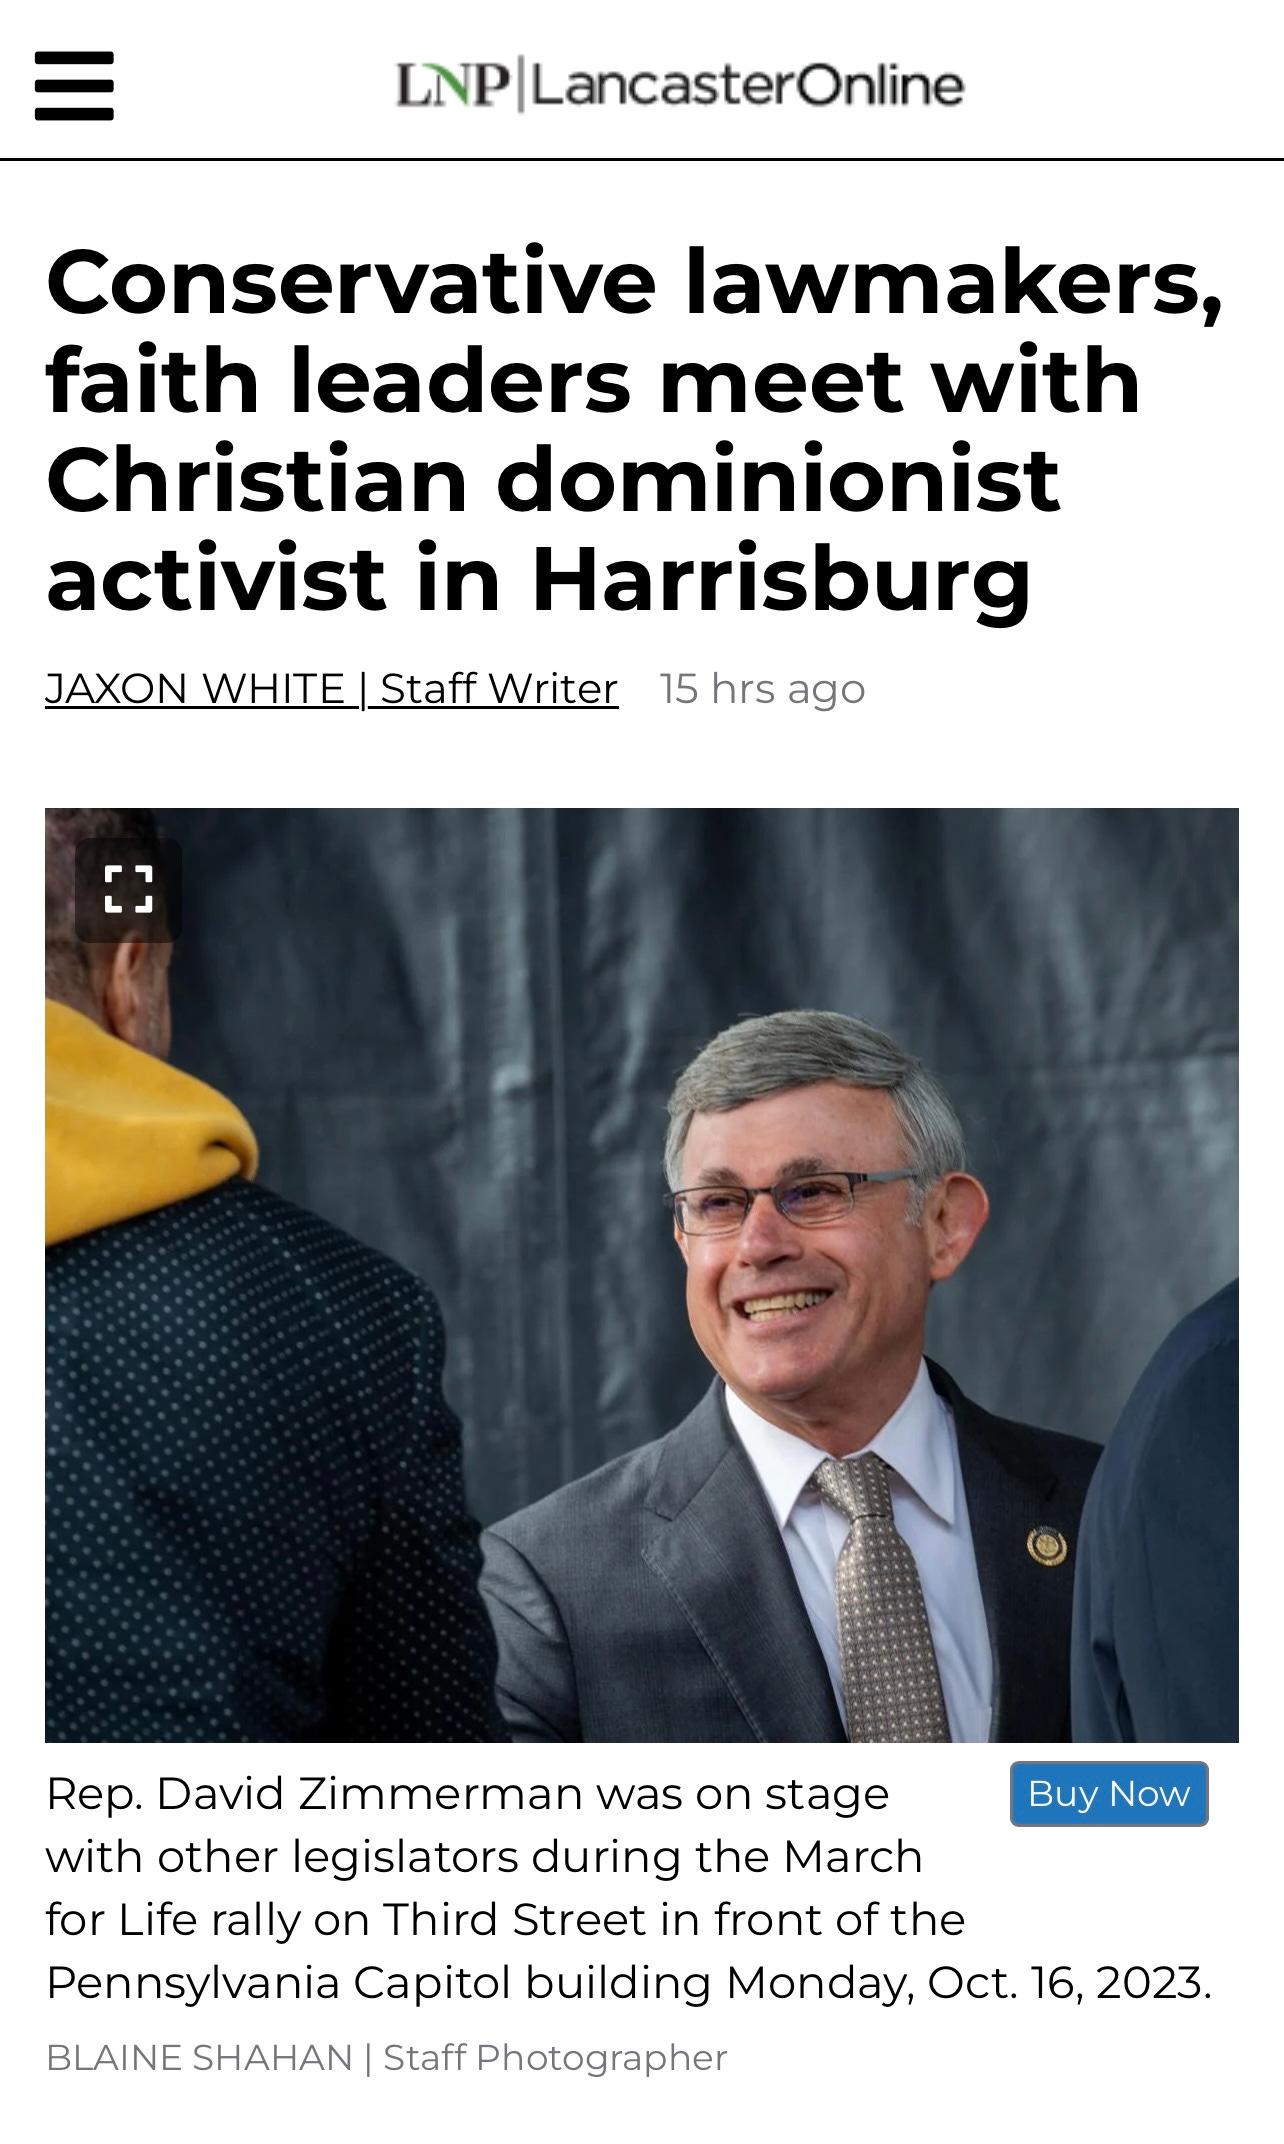 Screen capture of a Lancaster Online Headline that reads "Conservative lawmakers, faith leaders meet with Christian dominionist activist in Harrisburg.